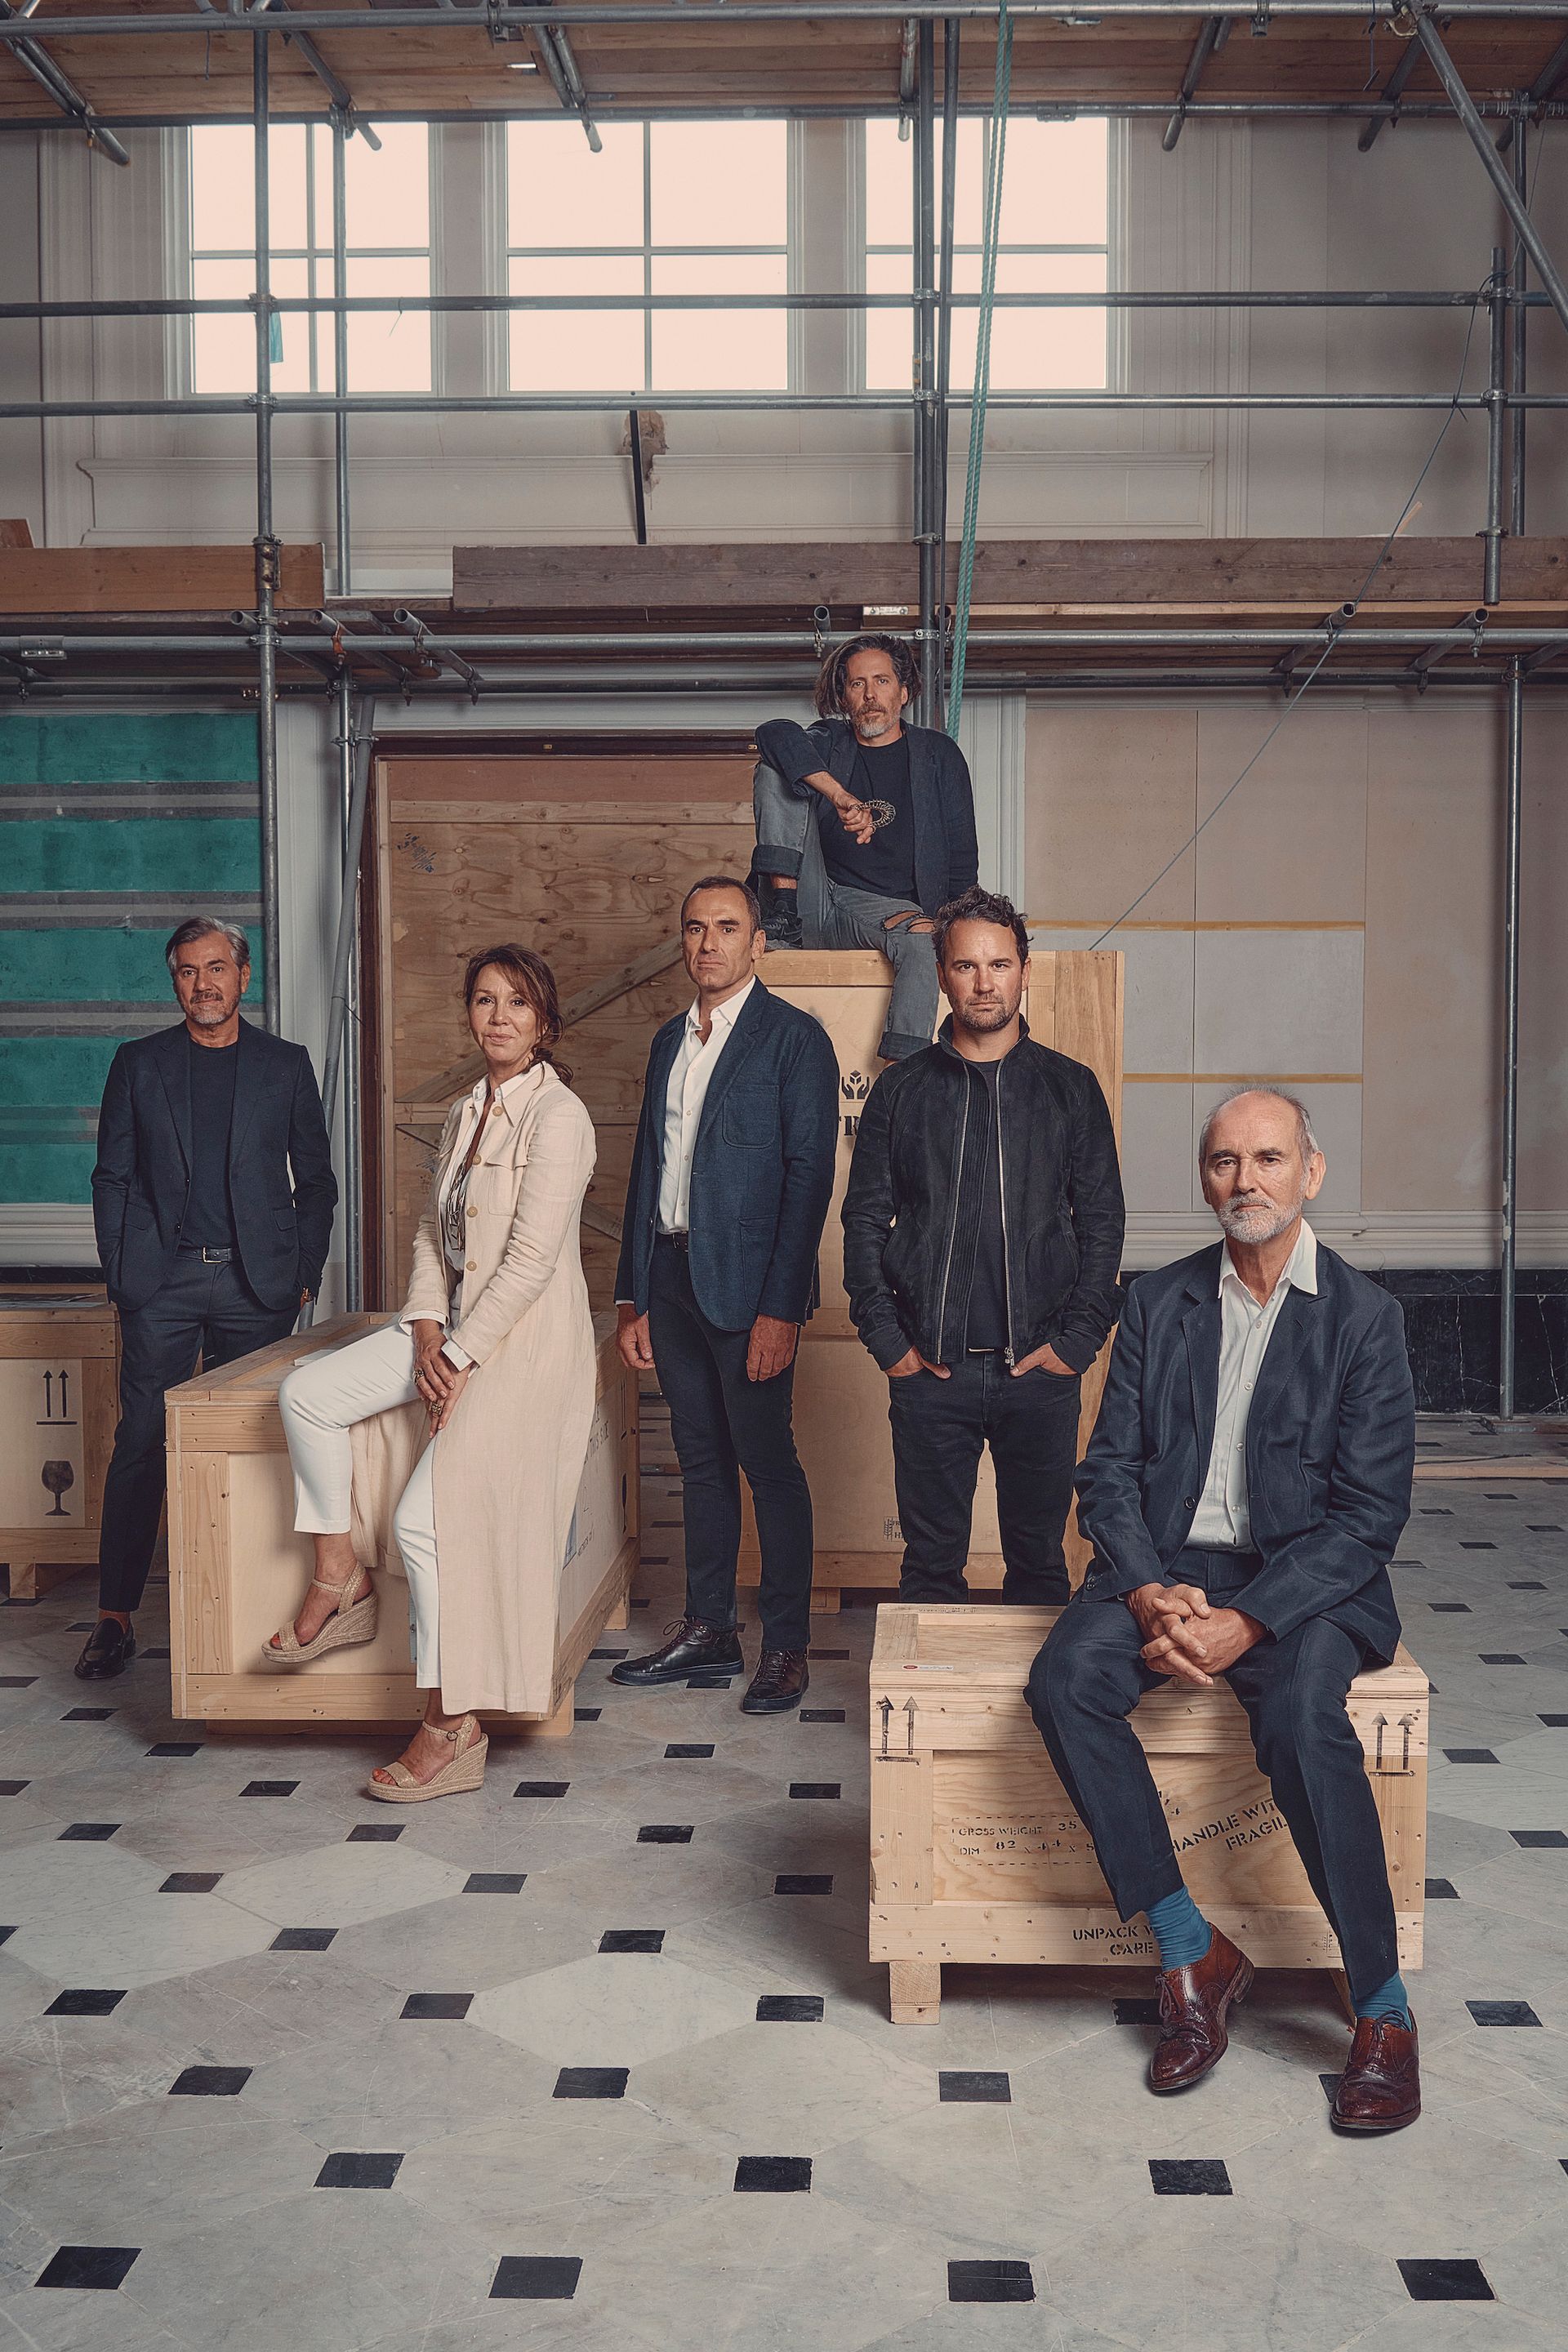 Members of the Carpenters Workshop Gallery team, including at top: Nacho Carbonell; middle row, left to right: Vincenzo De Cotiis, Ingrid Donat, Loïc Le Gaillard, Julien Lombrail; foreground: Christopher Le Brun. Courtesy of Ladbroke Hall and Carpenters Workshop Gallery. Photo by Tom Jamieson.